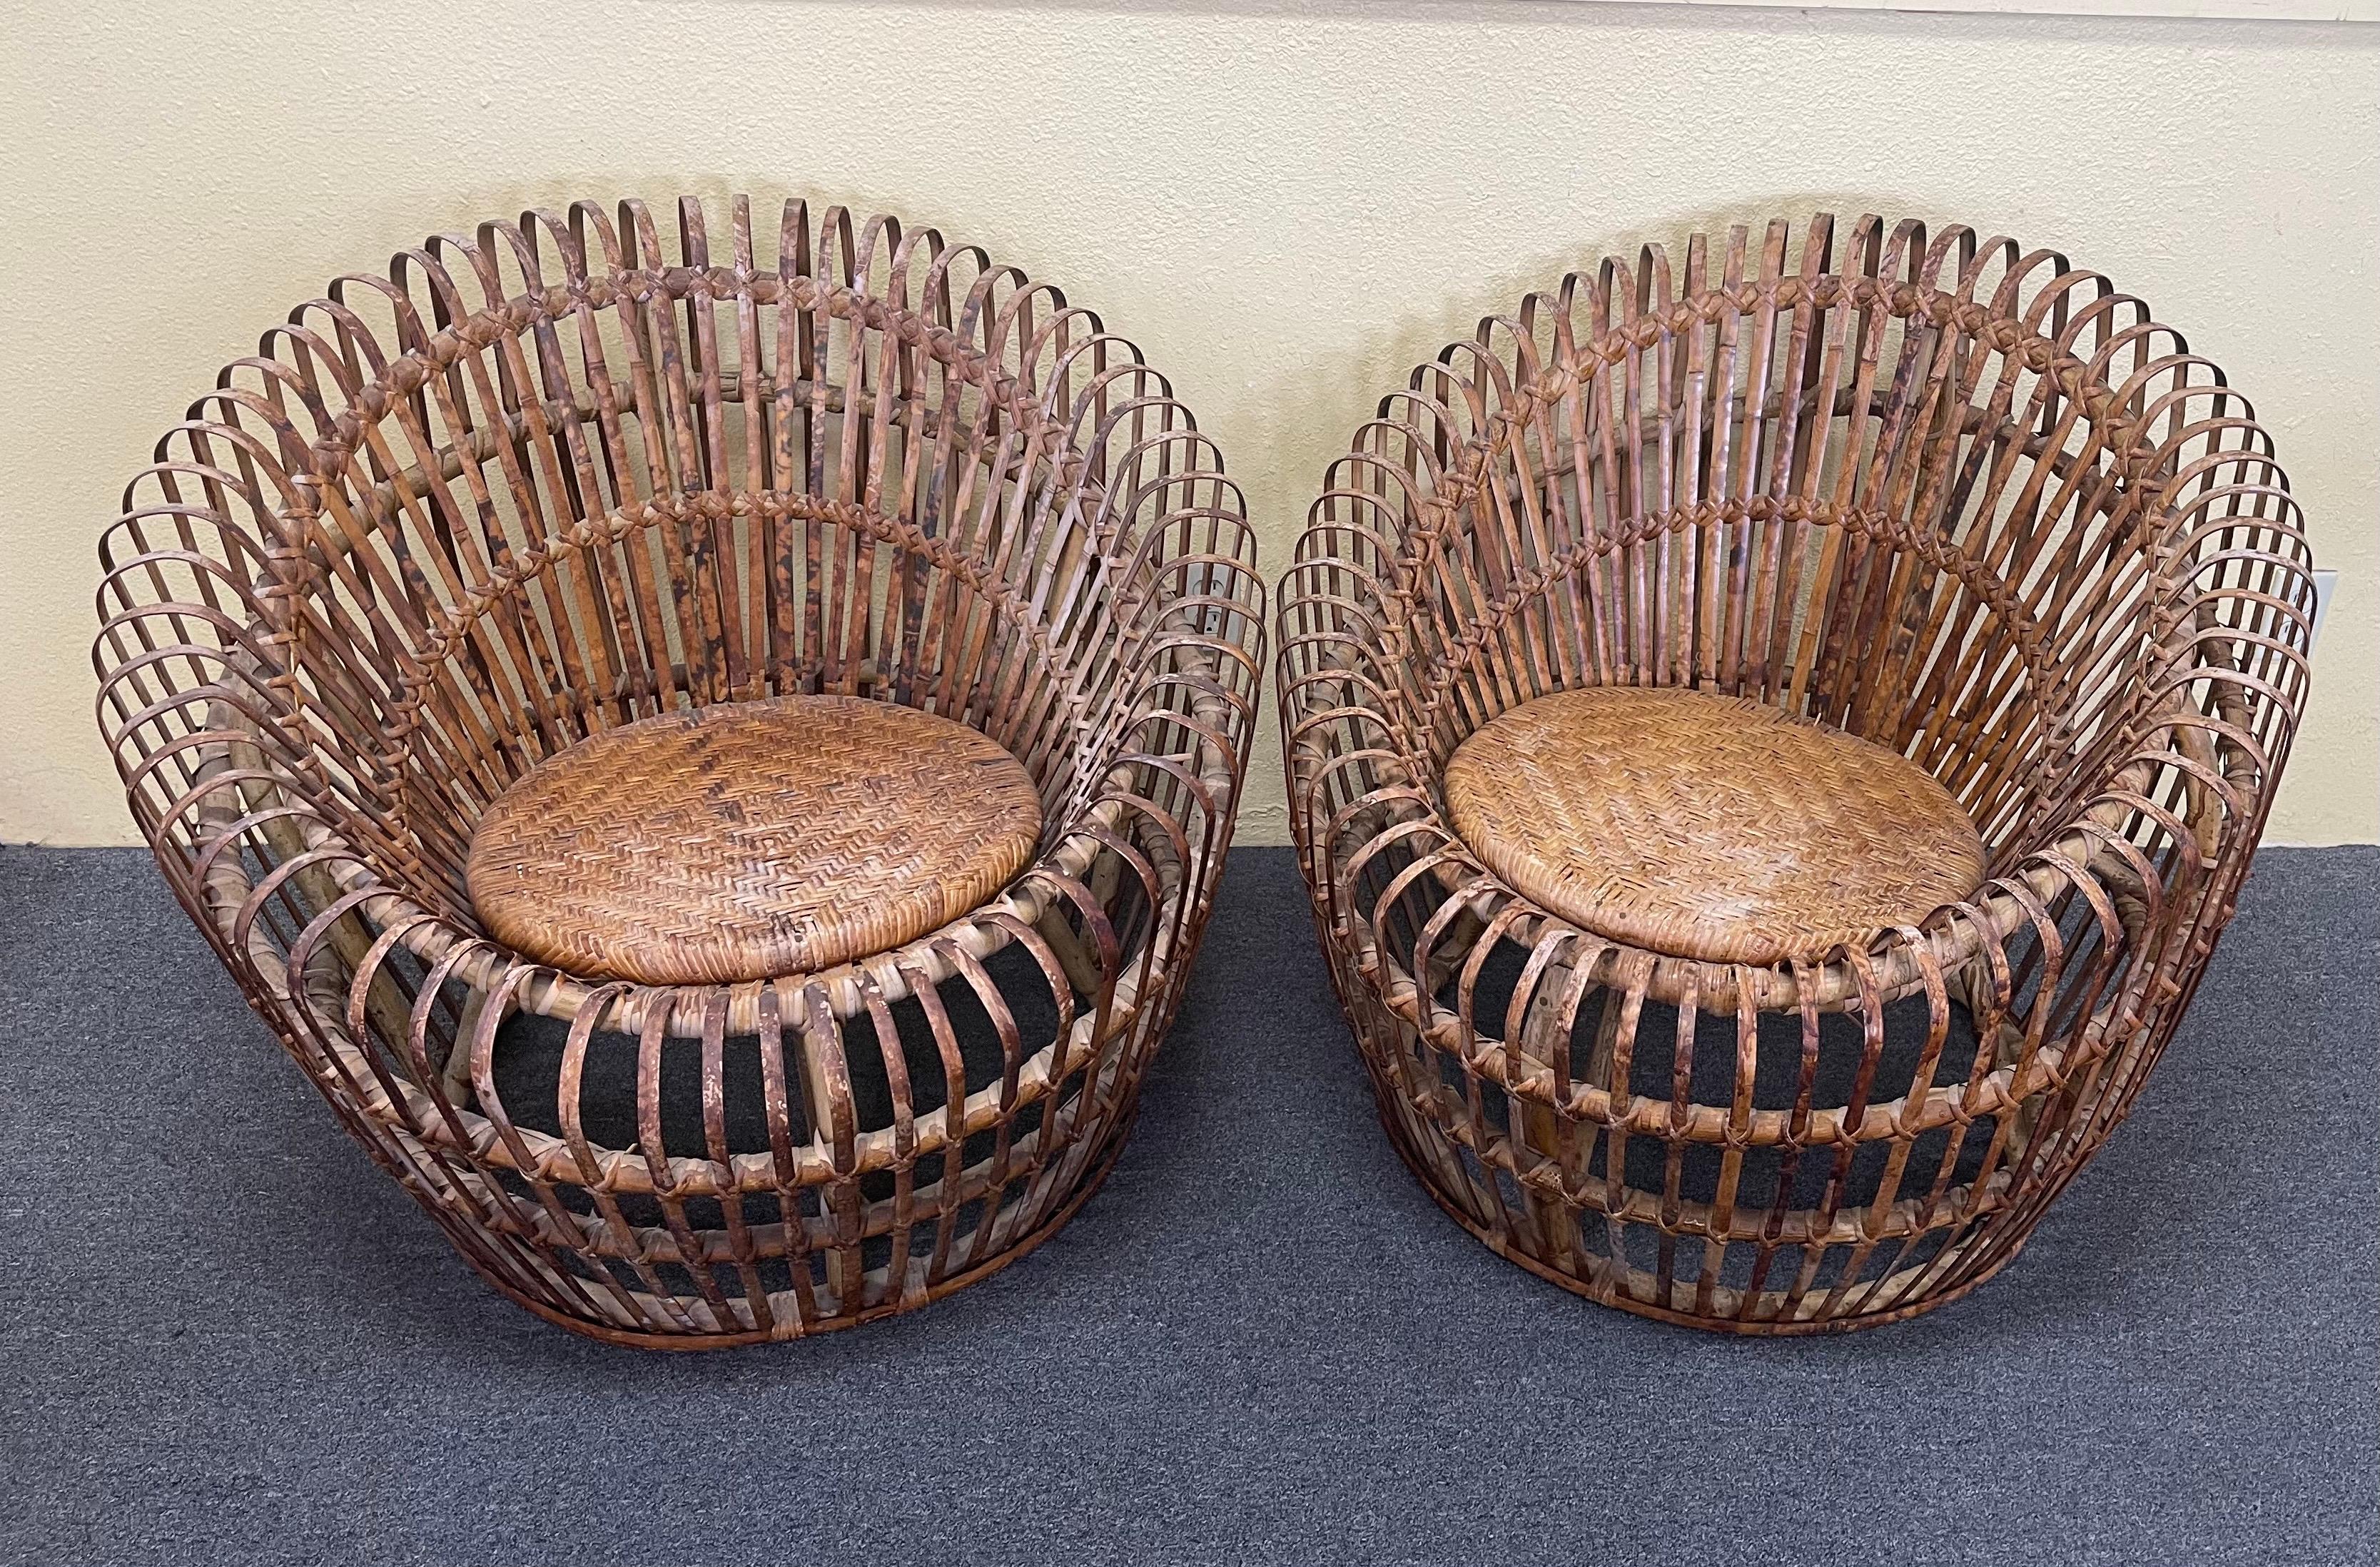 Pair of woven bamboo / rattan lounge chairs in the style of Franco Albini, circa 1950s. These wonderful vintage chairs have a woven seat, bent tortoise colored reed and a very cool round style that makes the chairs so appealing. They are very light,